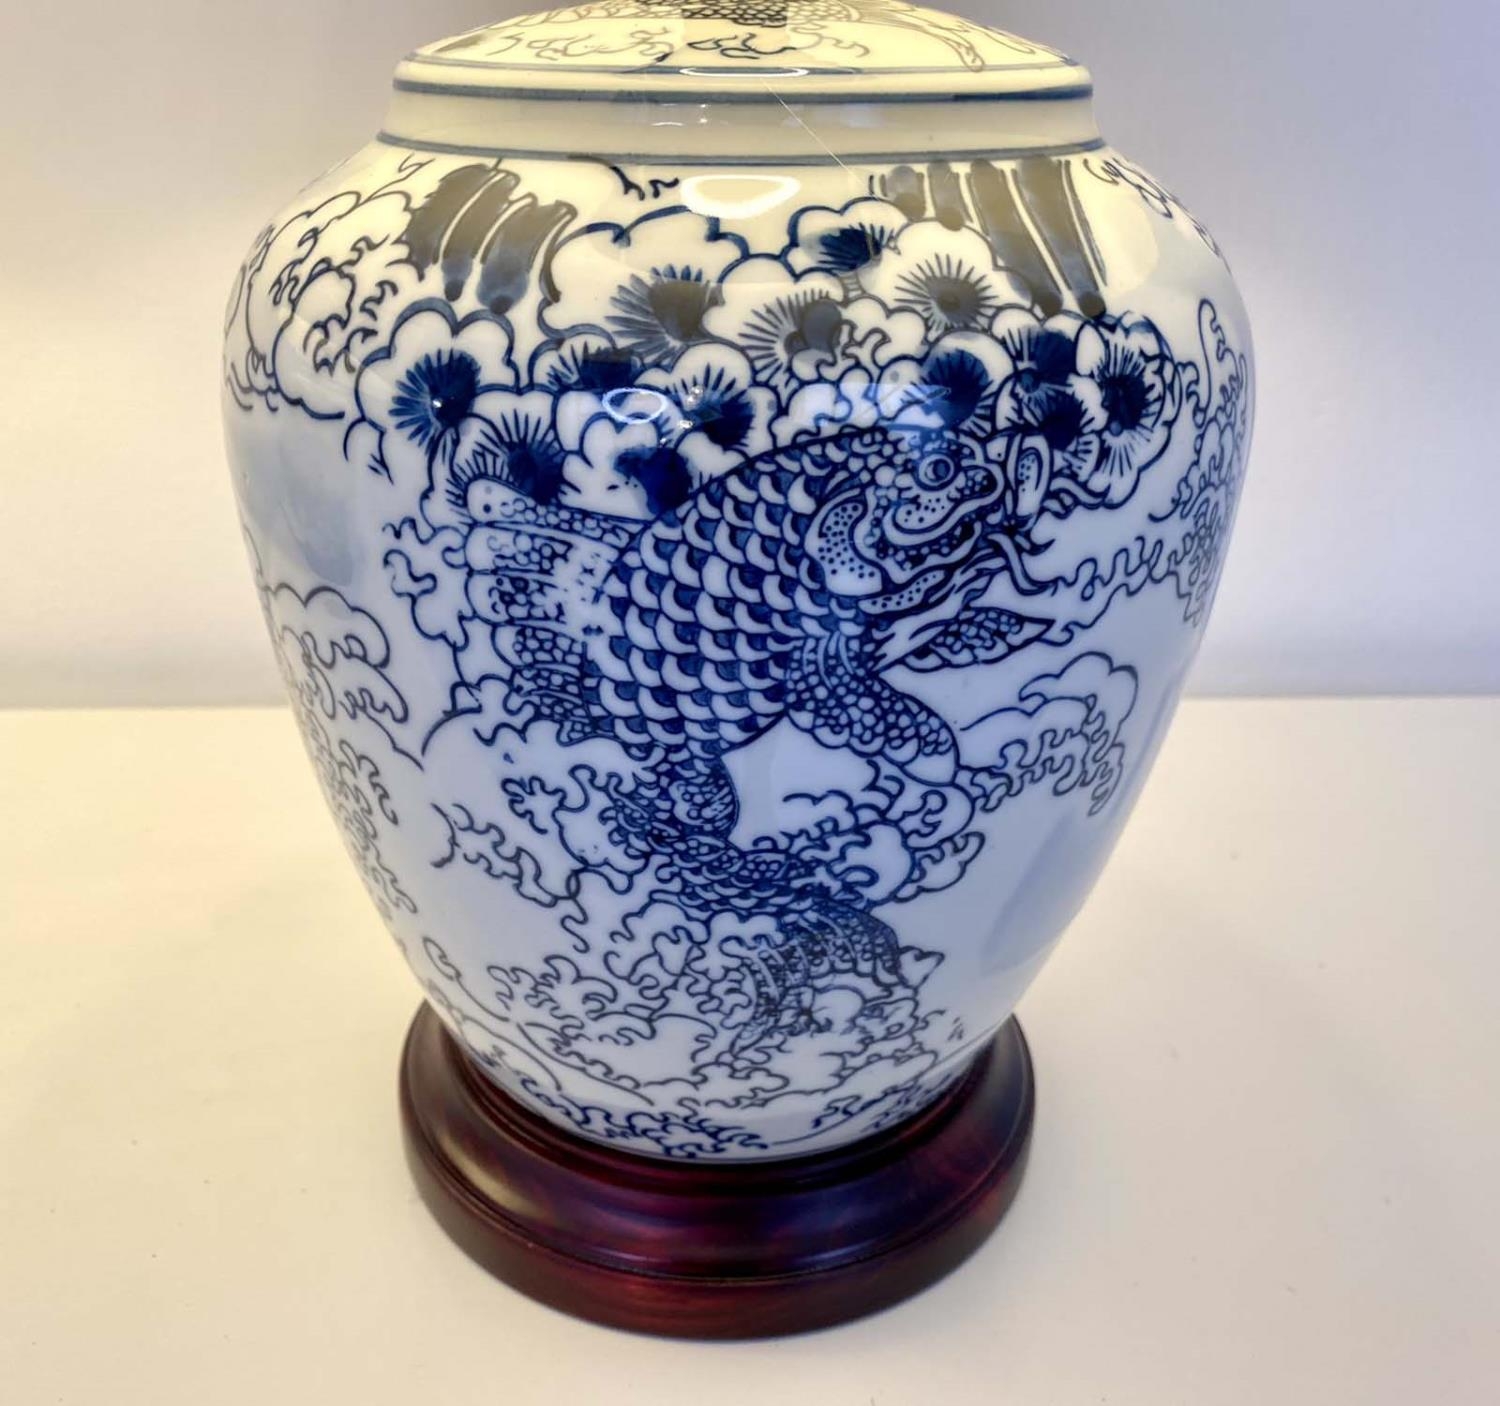 TABLE LAMPS, pair, 52cm H x 35cm diam., Chinese export style blue and white ceramic, Carp detail, - Image 2 of 3